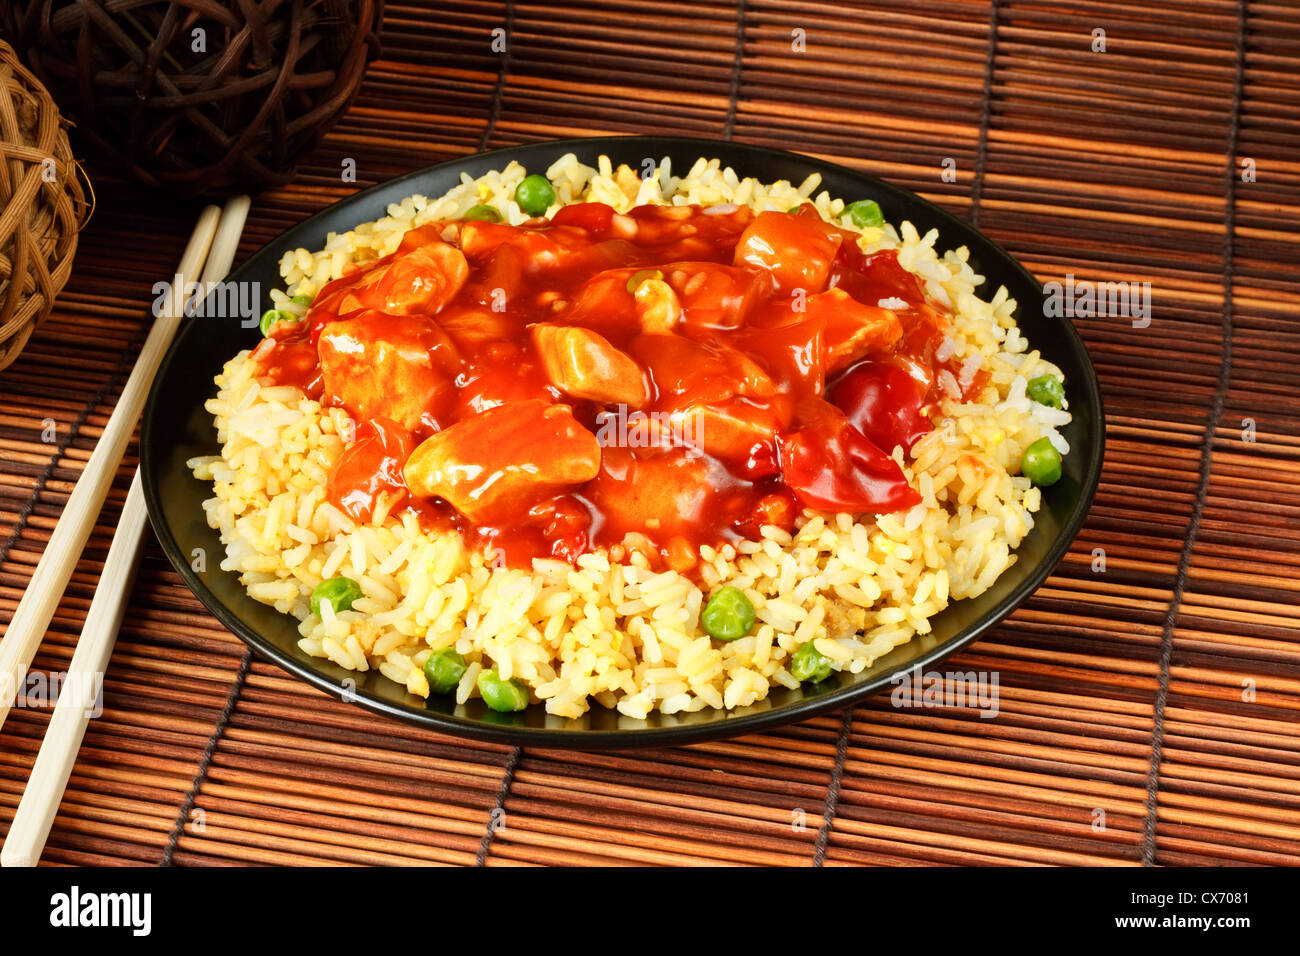 sweet and sour chicken with fried rice - popular chinese cuisine Stock Photo